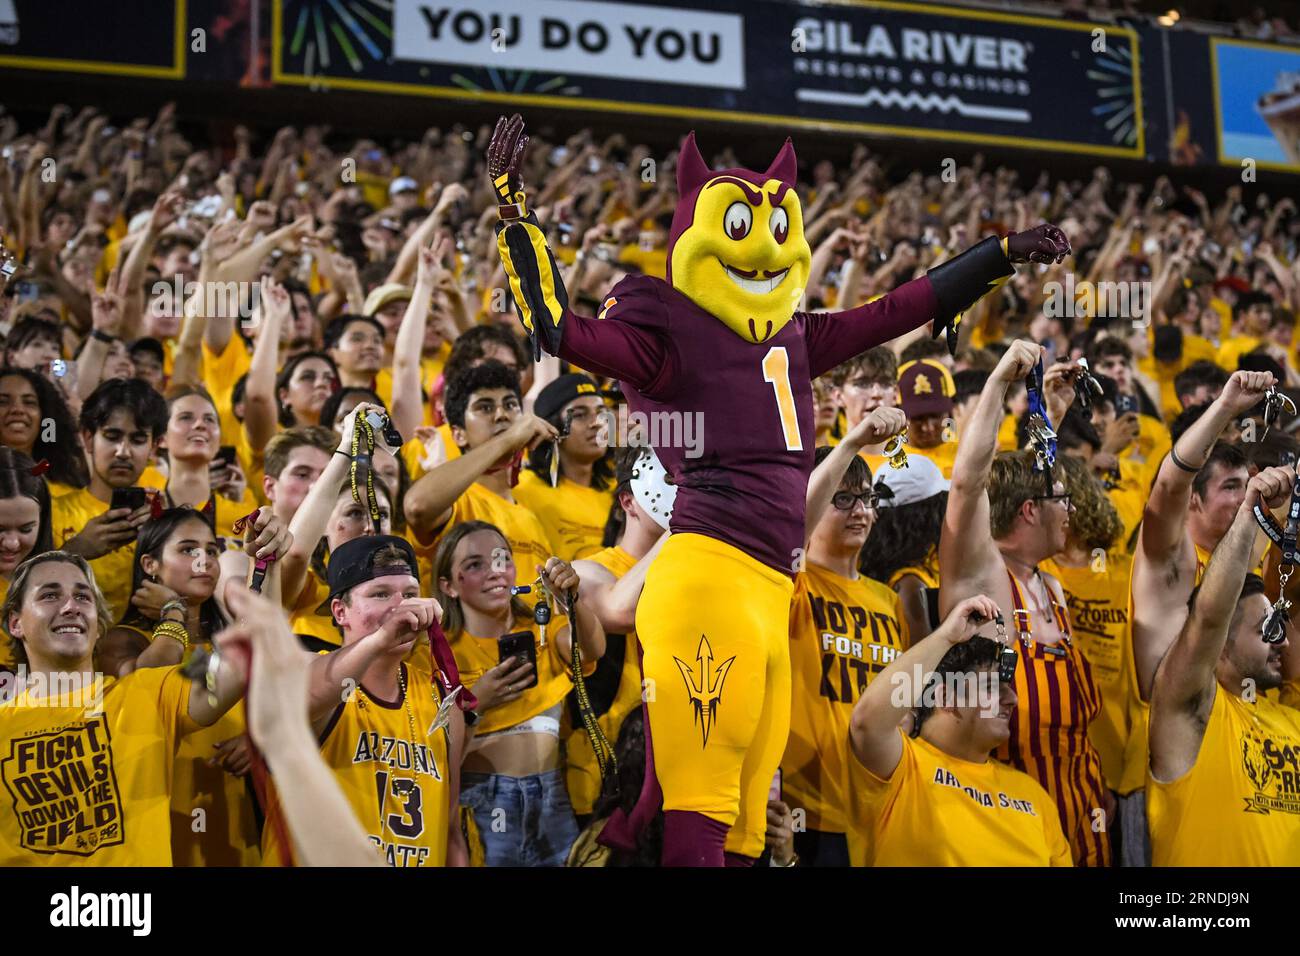 Arizona State mascot “Sparky” leads the student section in a chant during kick off of a game against the Southern Utah Thunderbirds, on Thursday, Augu Stock Photo